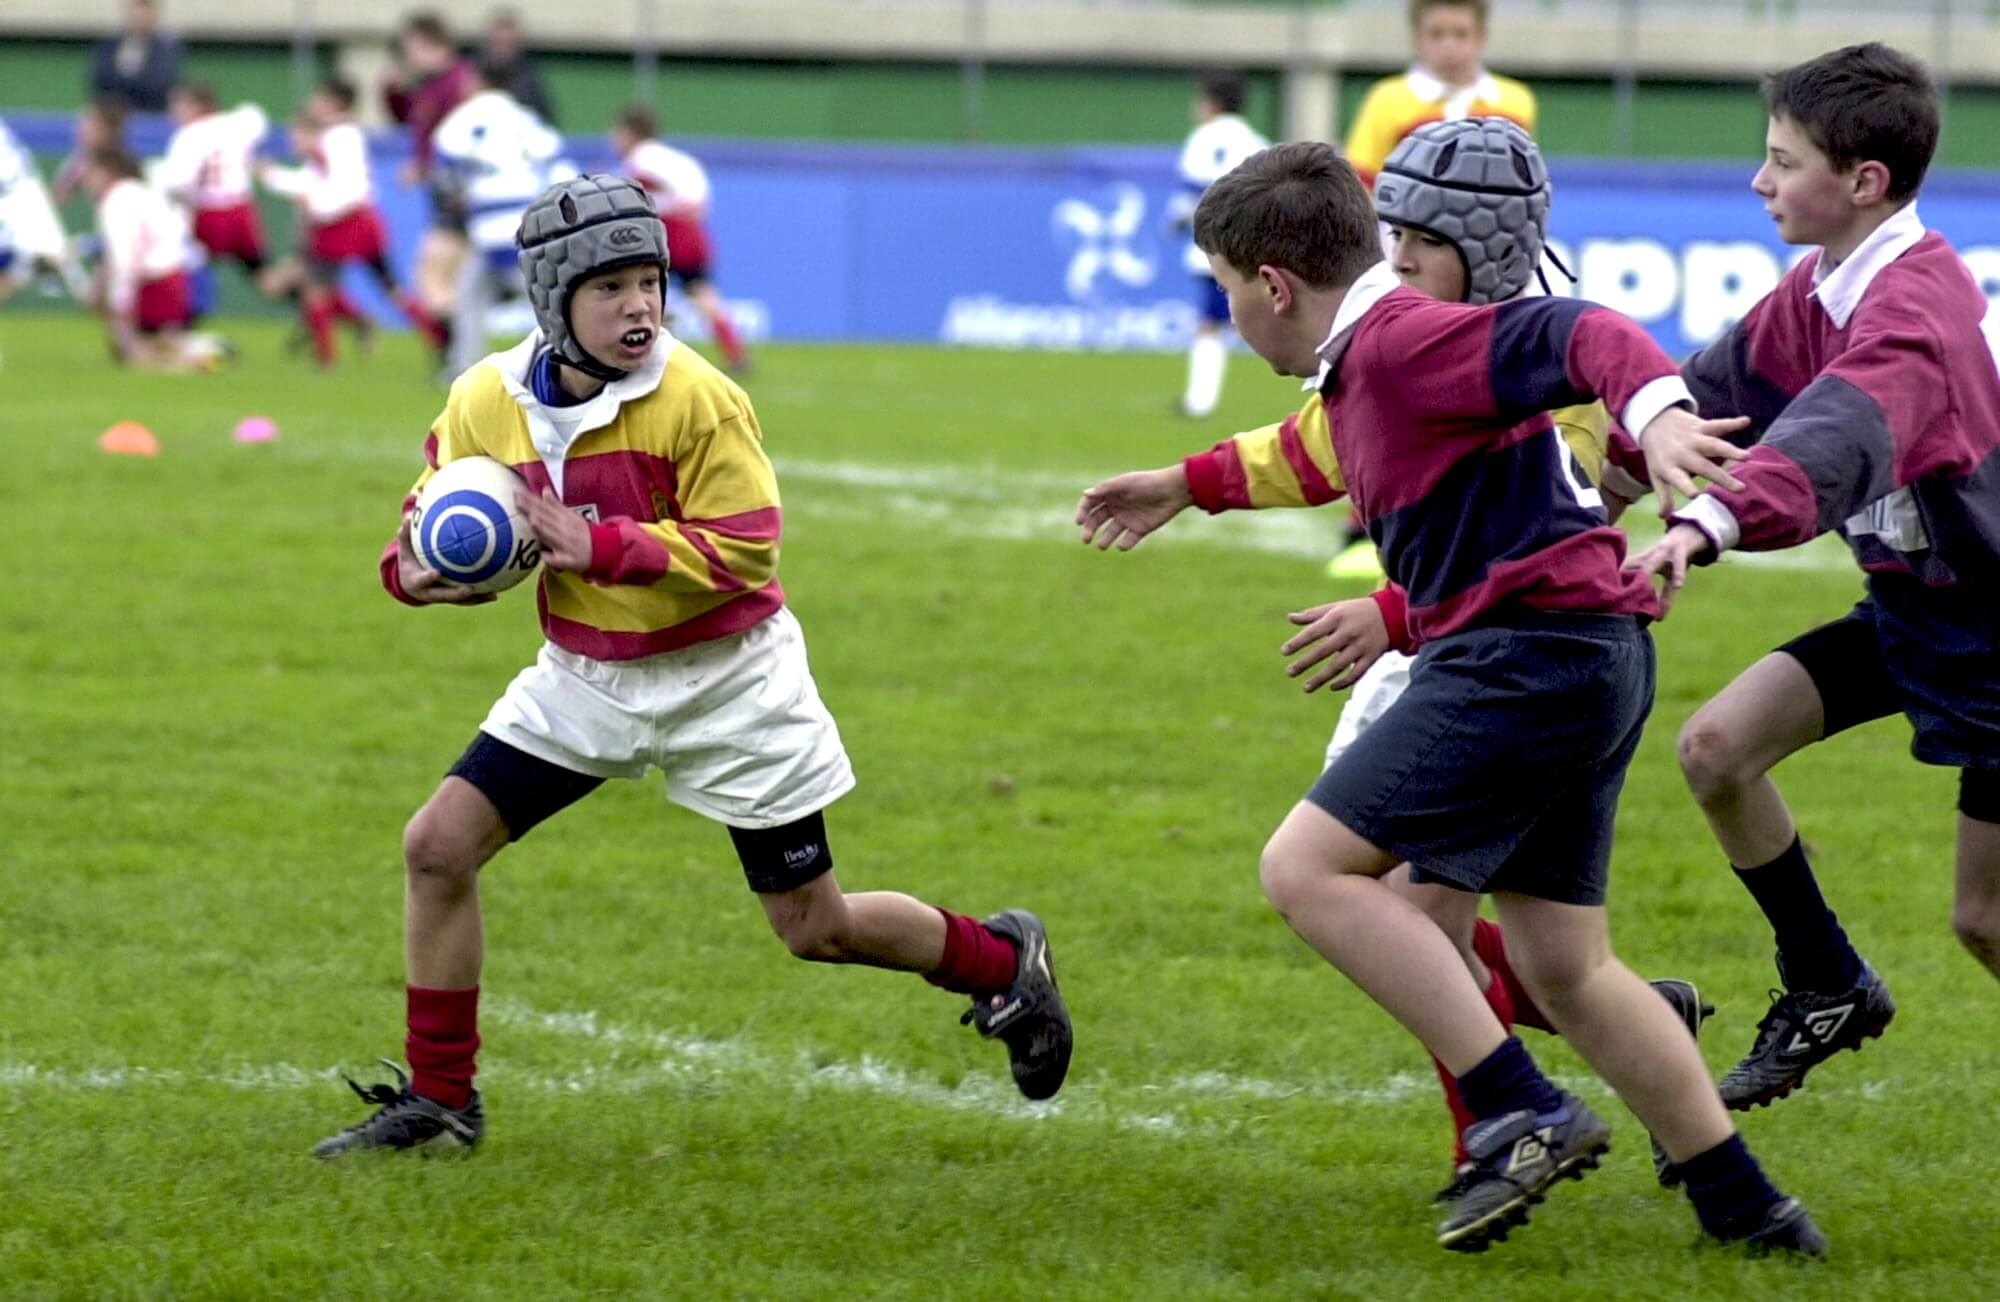 Rugby player runs with the ball pursued by opposing players during a match